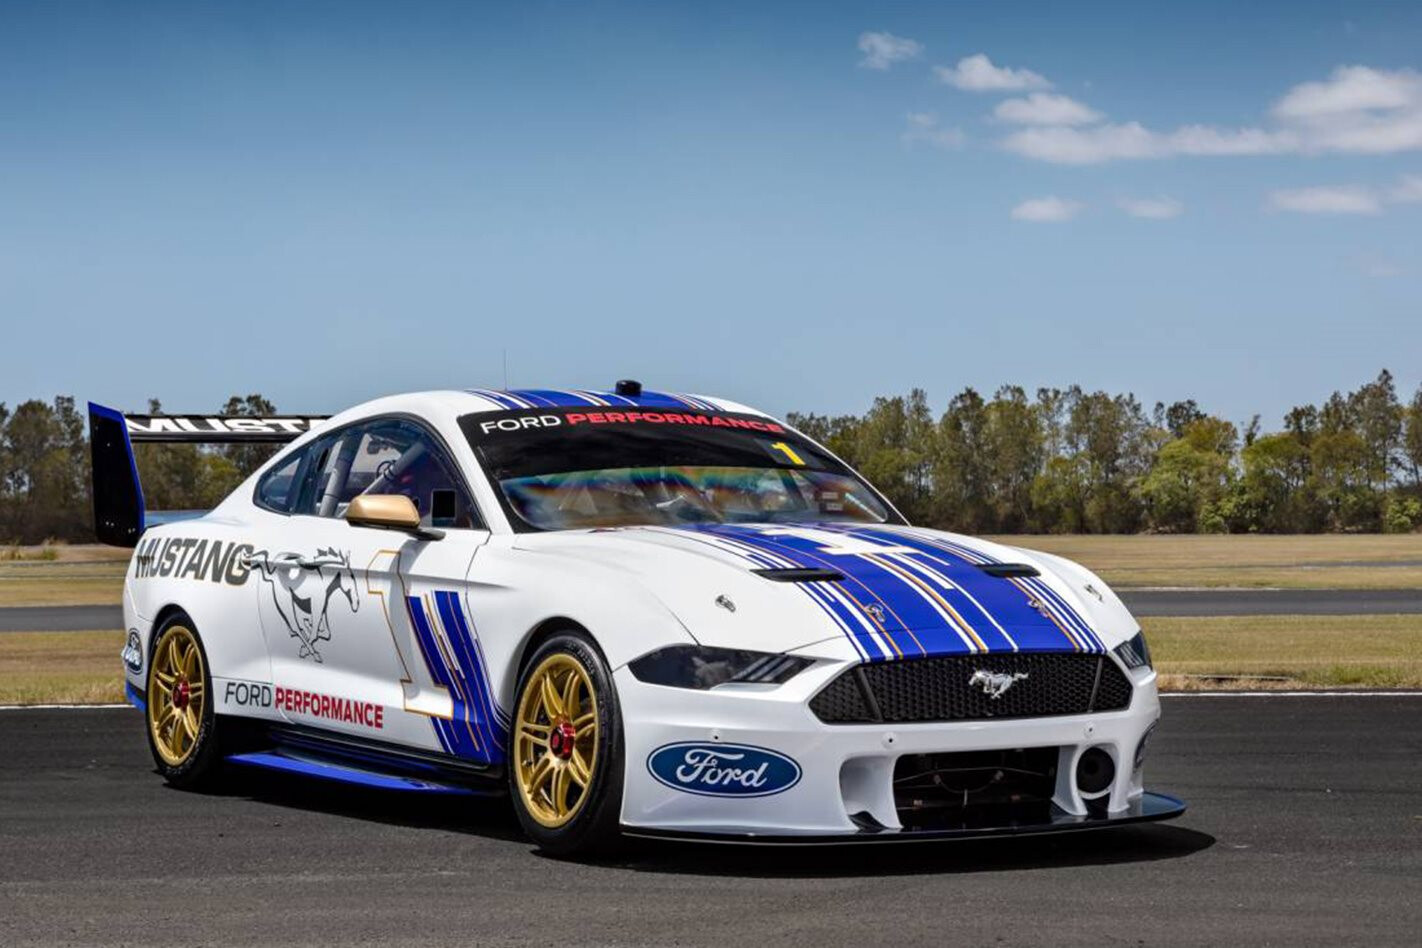 Why The Ford Mustang Supercar Looks So Bizarre